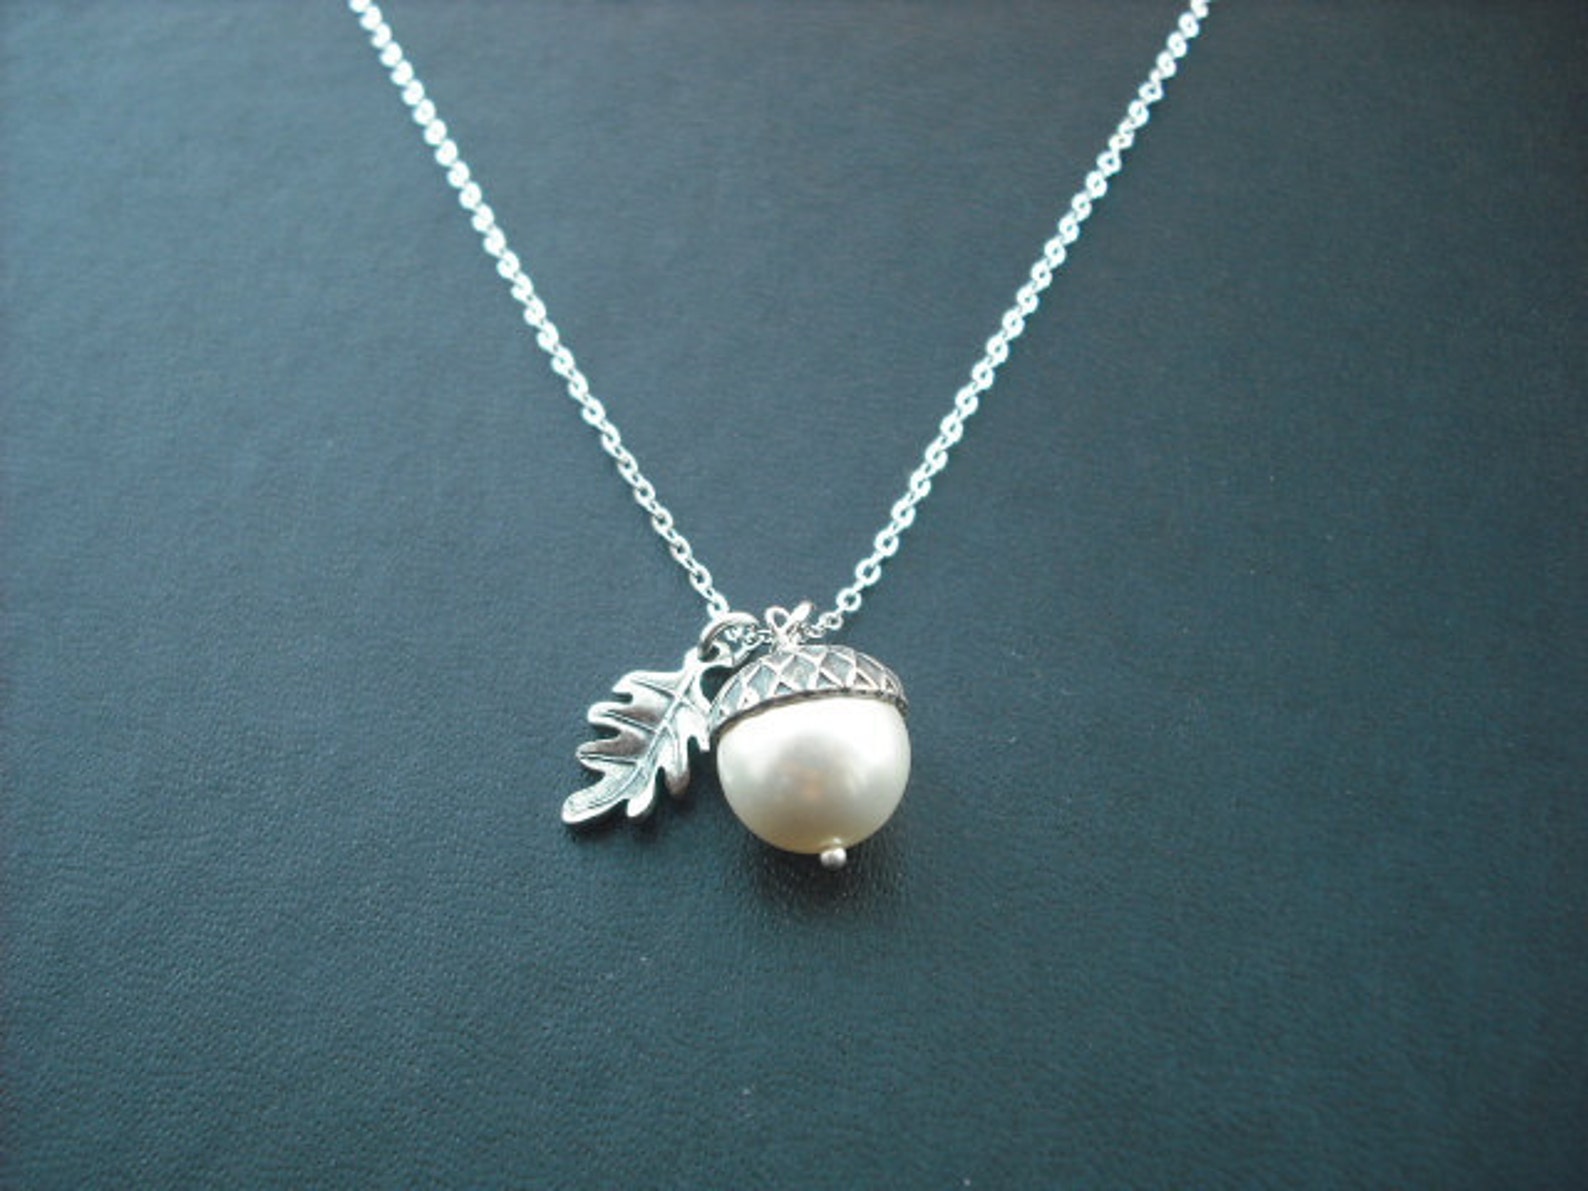 Bridesmaids Gift Wedding Gift Sterling Silver Chain - Etsy